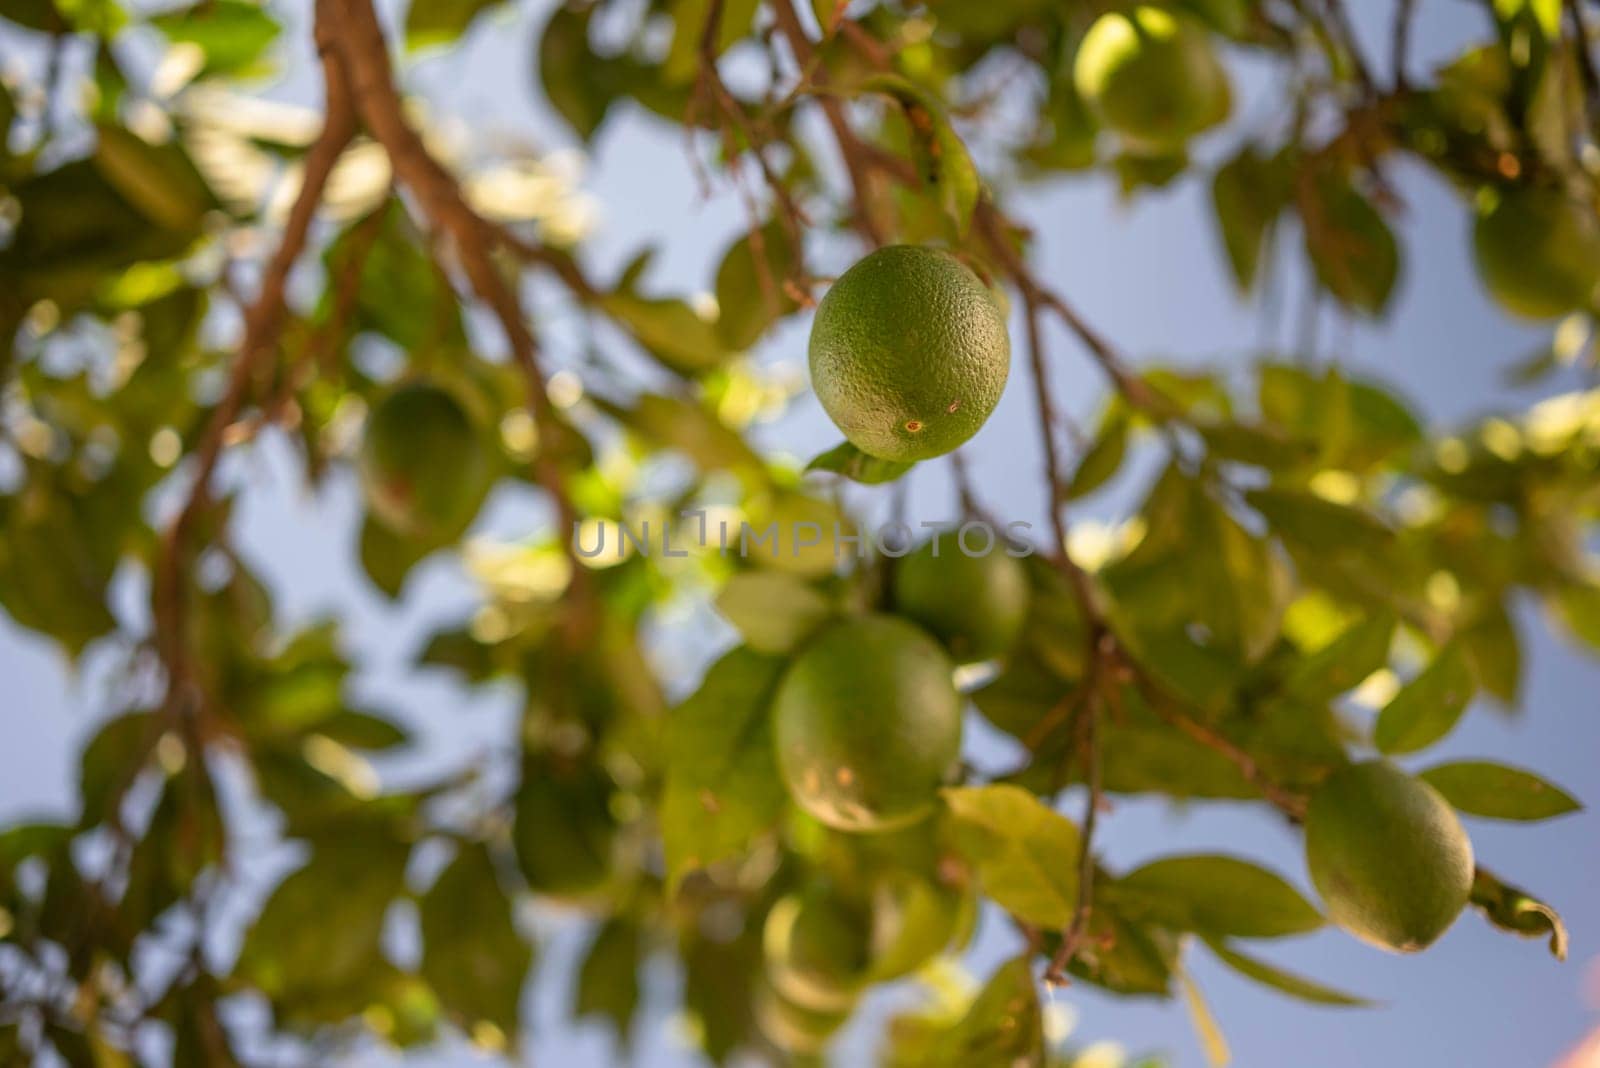 Green lemons growing on a tree. Citrus fruit on green leaves background by amovitania